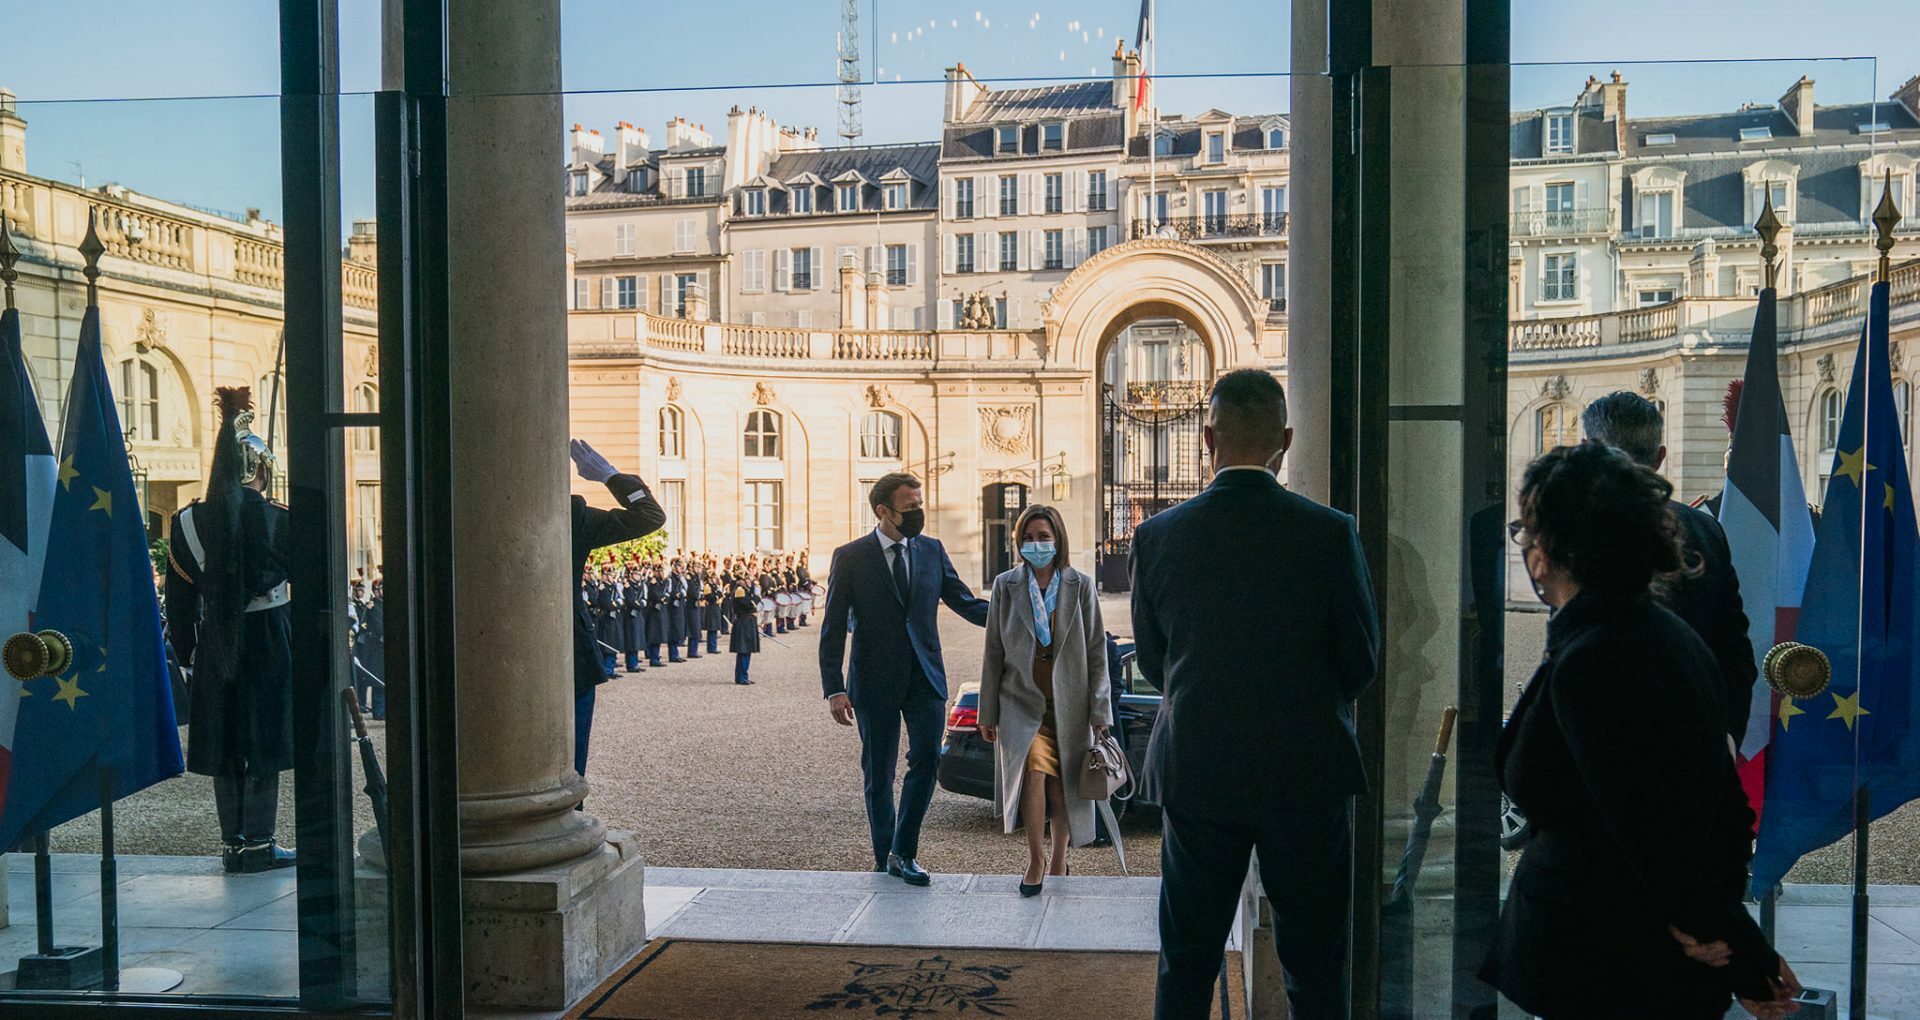 President Maia Sandu Met with the President of France, Emmanuel Macron, During Her Visit to Paris for the Peace Forum